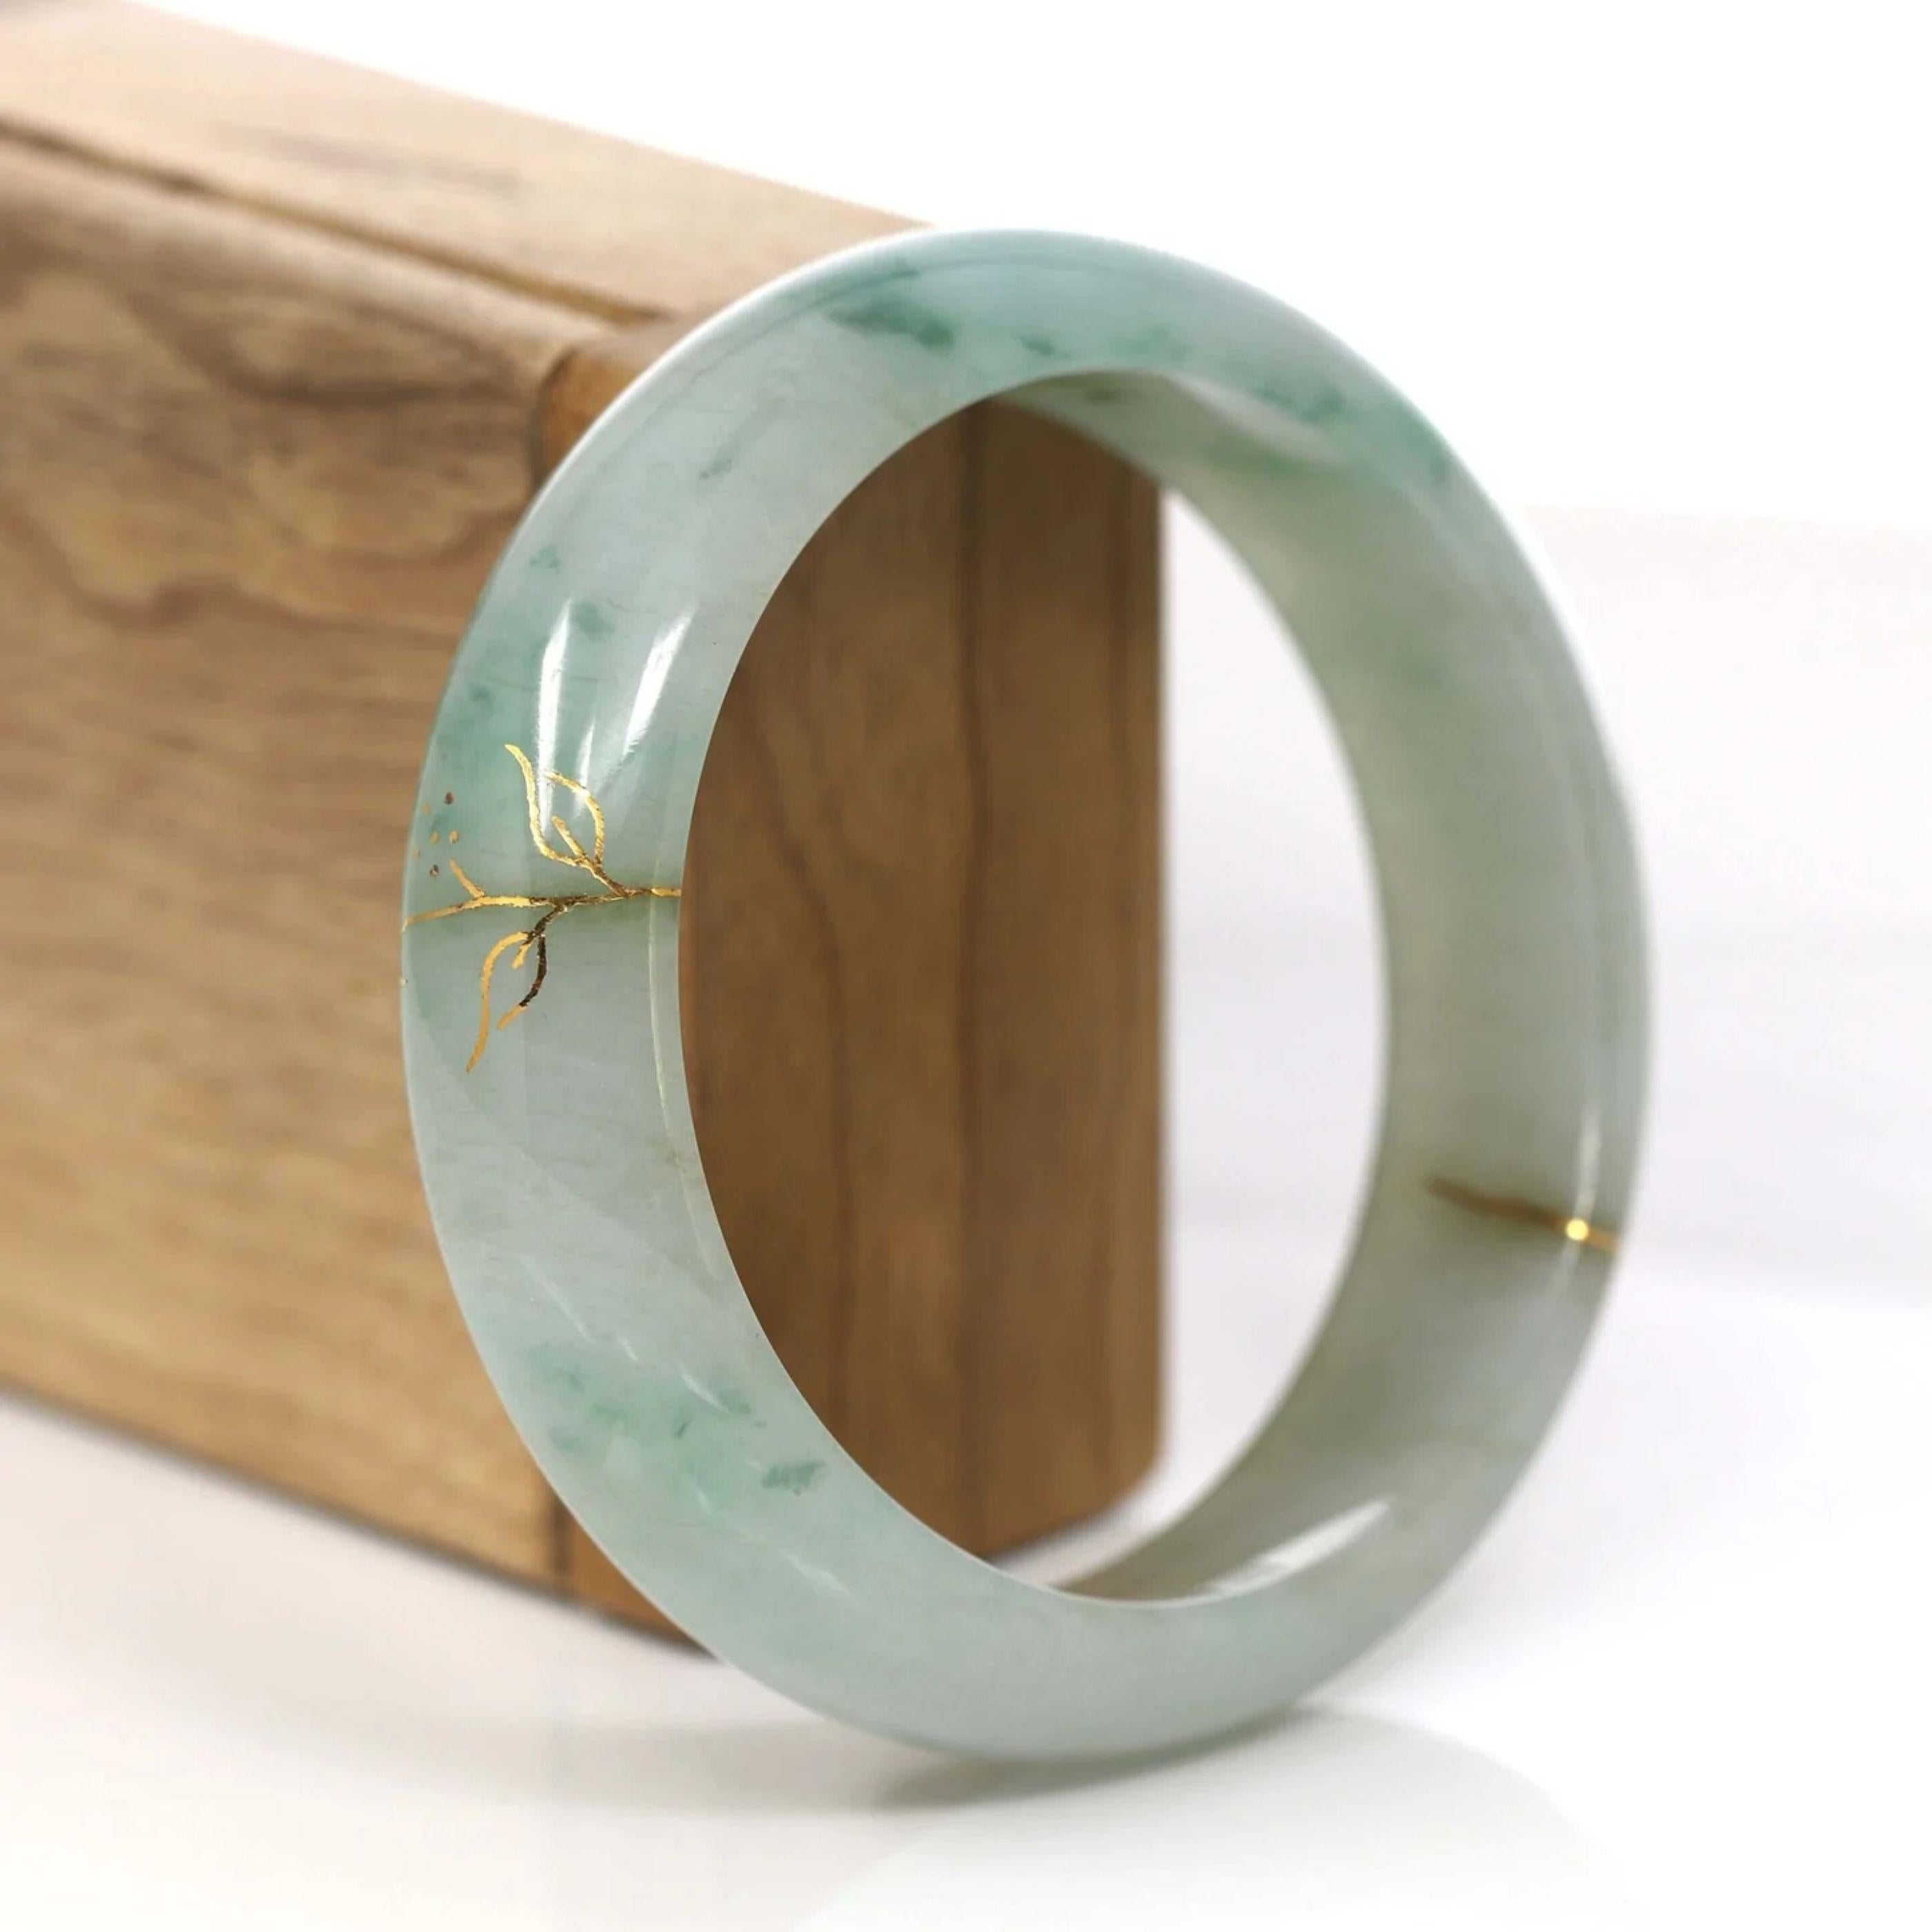  * DETAILS--- Genuine Burmese Jadeite Jade Bangle Bracelet. This bangle is made with high-quality genuine Burmese Ice blue-green Jadeite jade, The jade texture is so smooth and translucent. The blue-green color and translucent inlaid with 18k rose